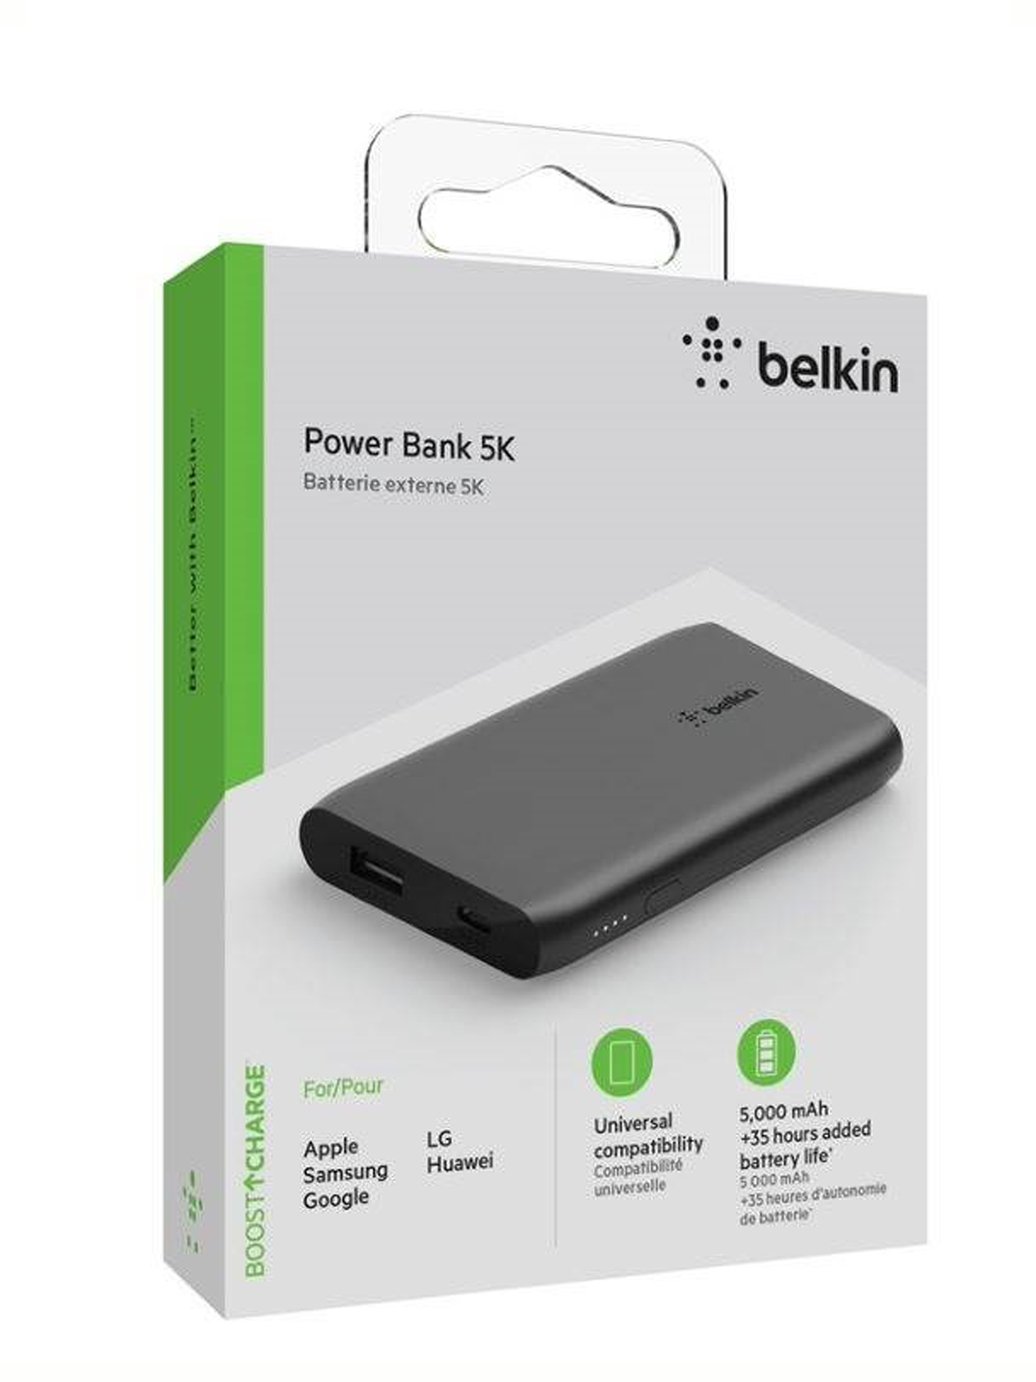 Belkin 5000mAh Power Bank Pre Charged Review